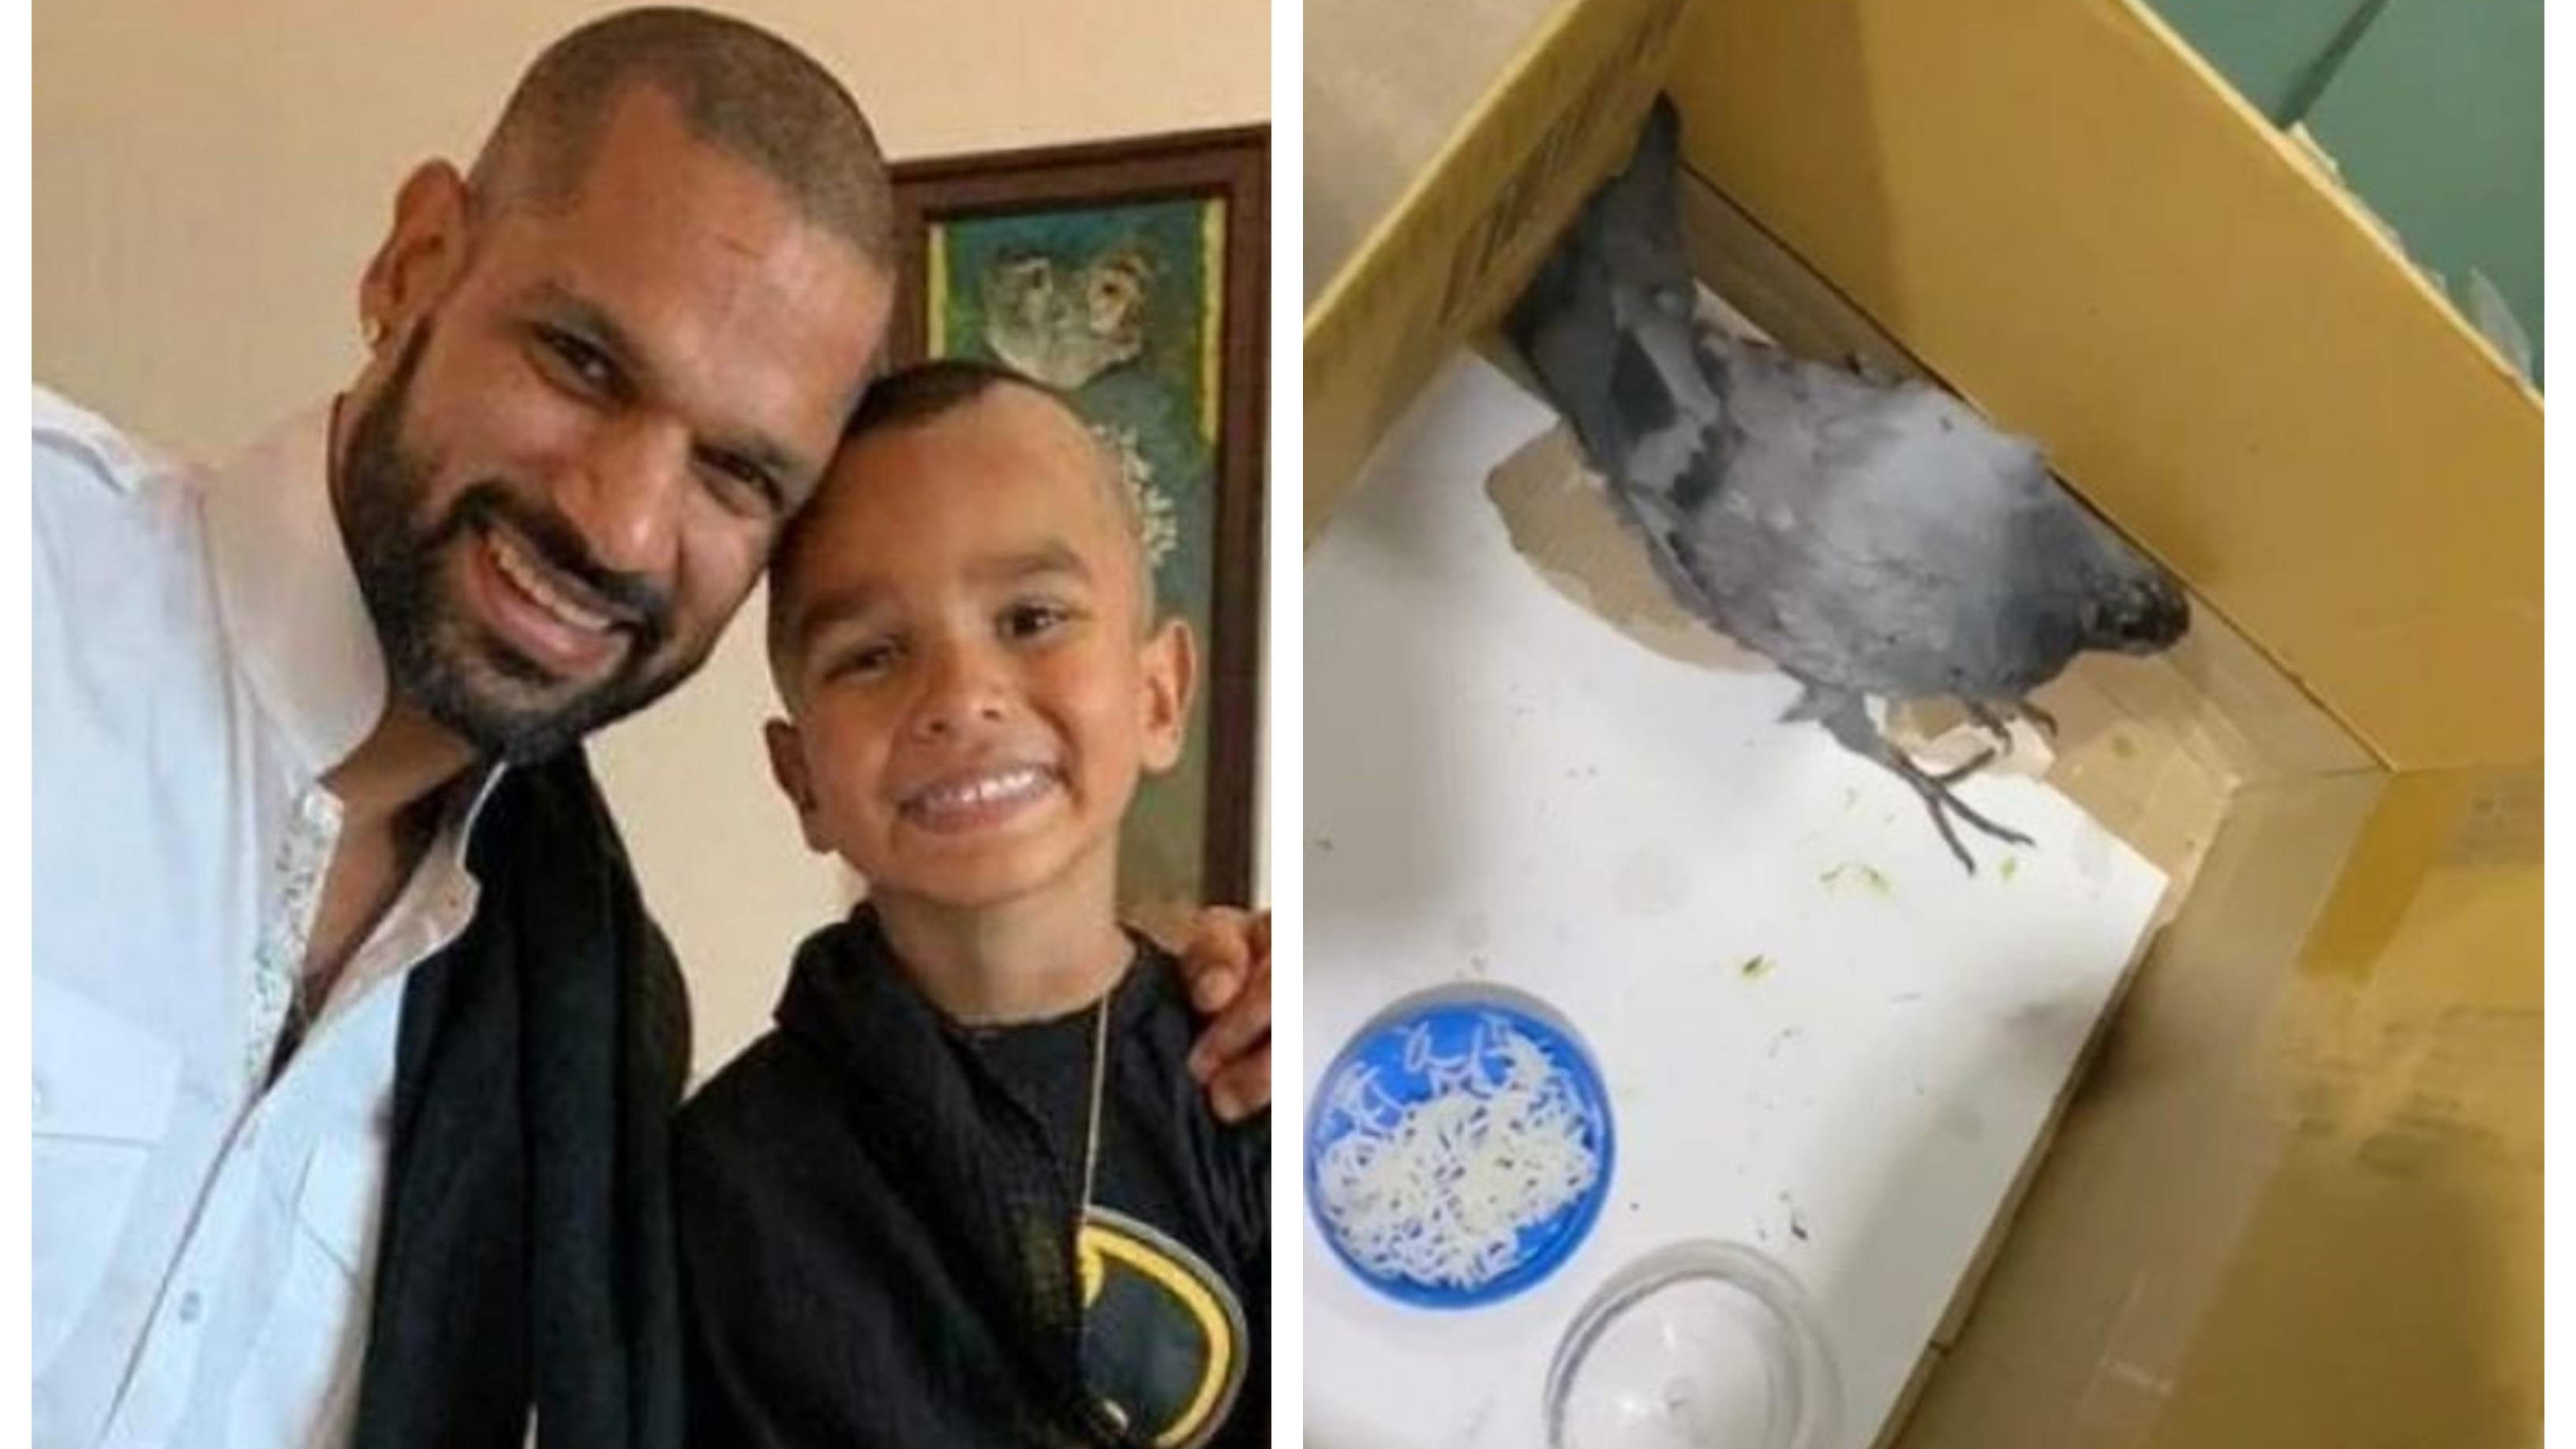 WATCH: Shikhar Dhawan rescues a pigeon, son Zoraver feeds it